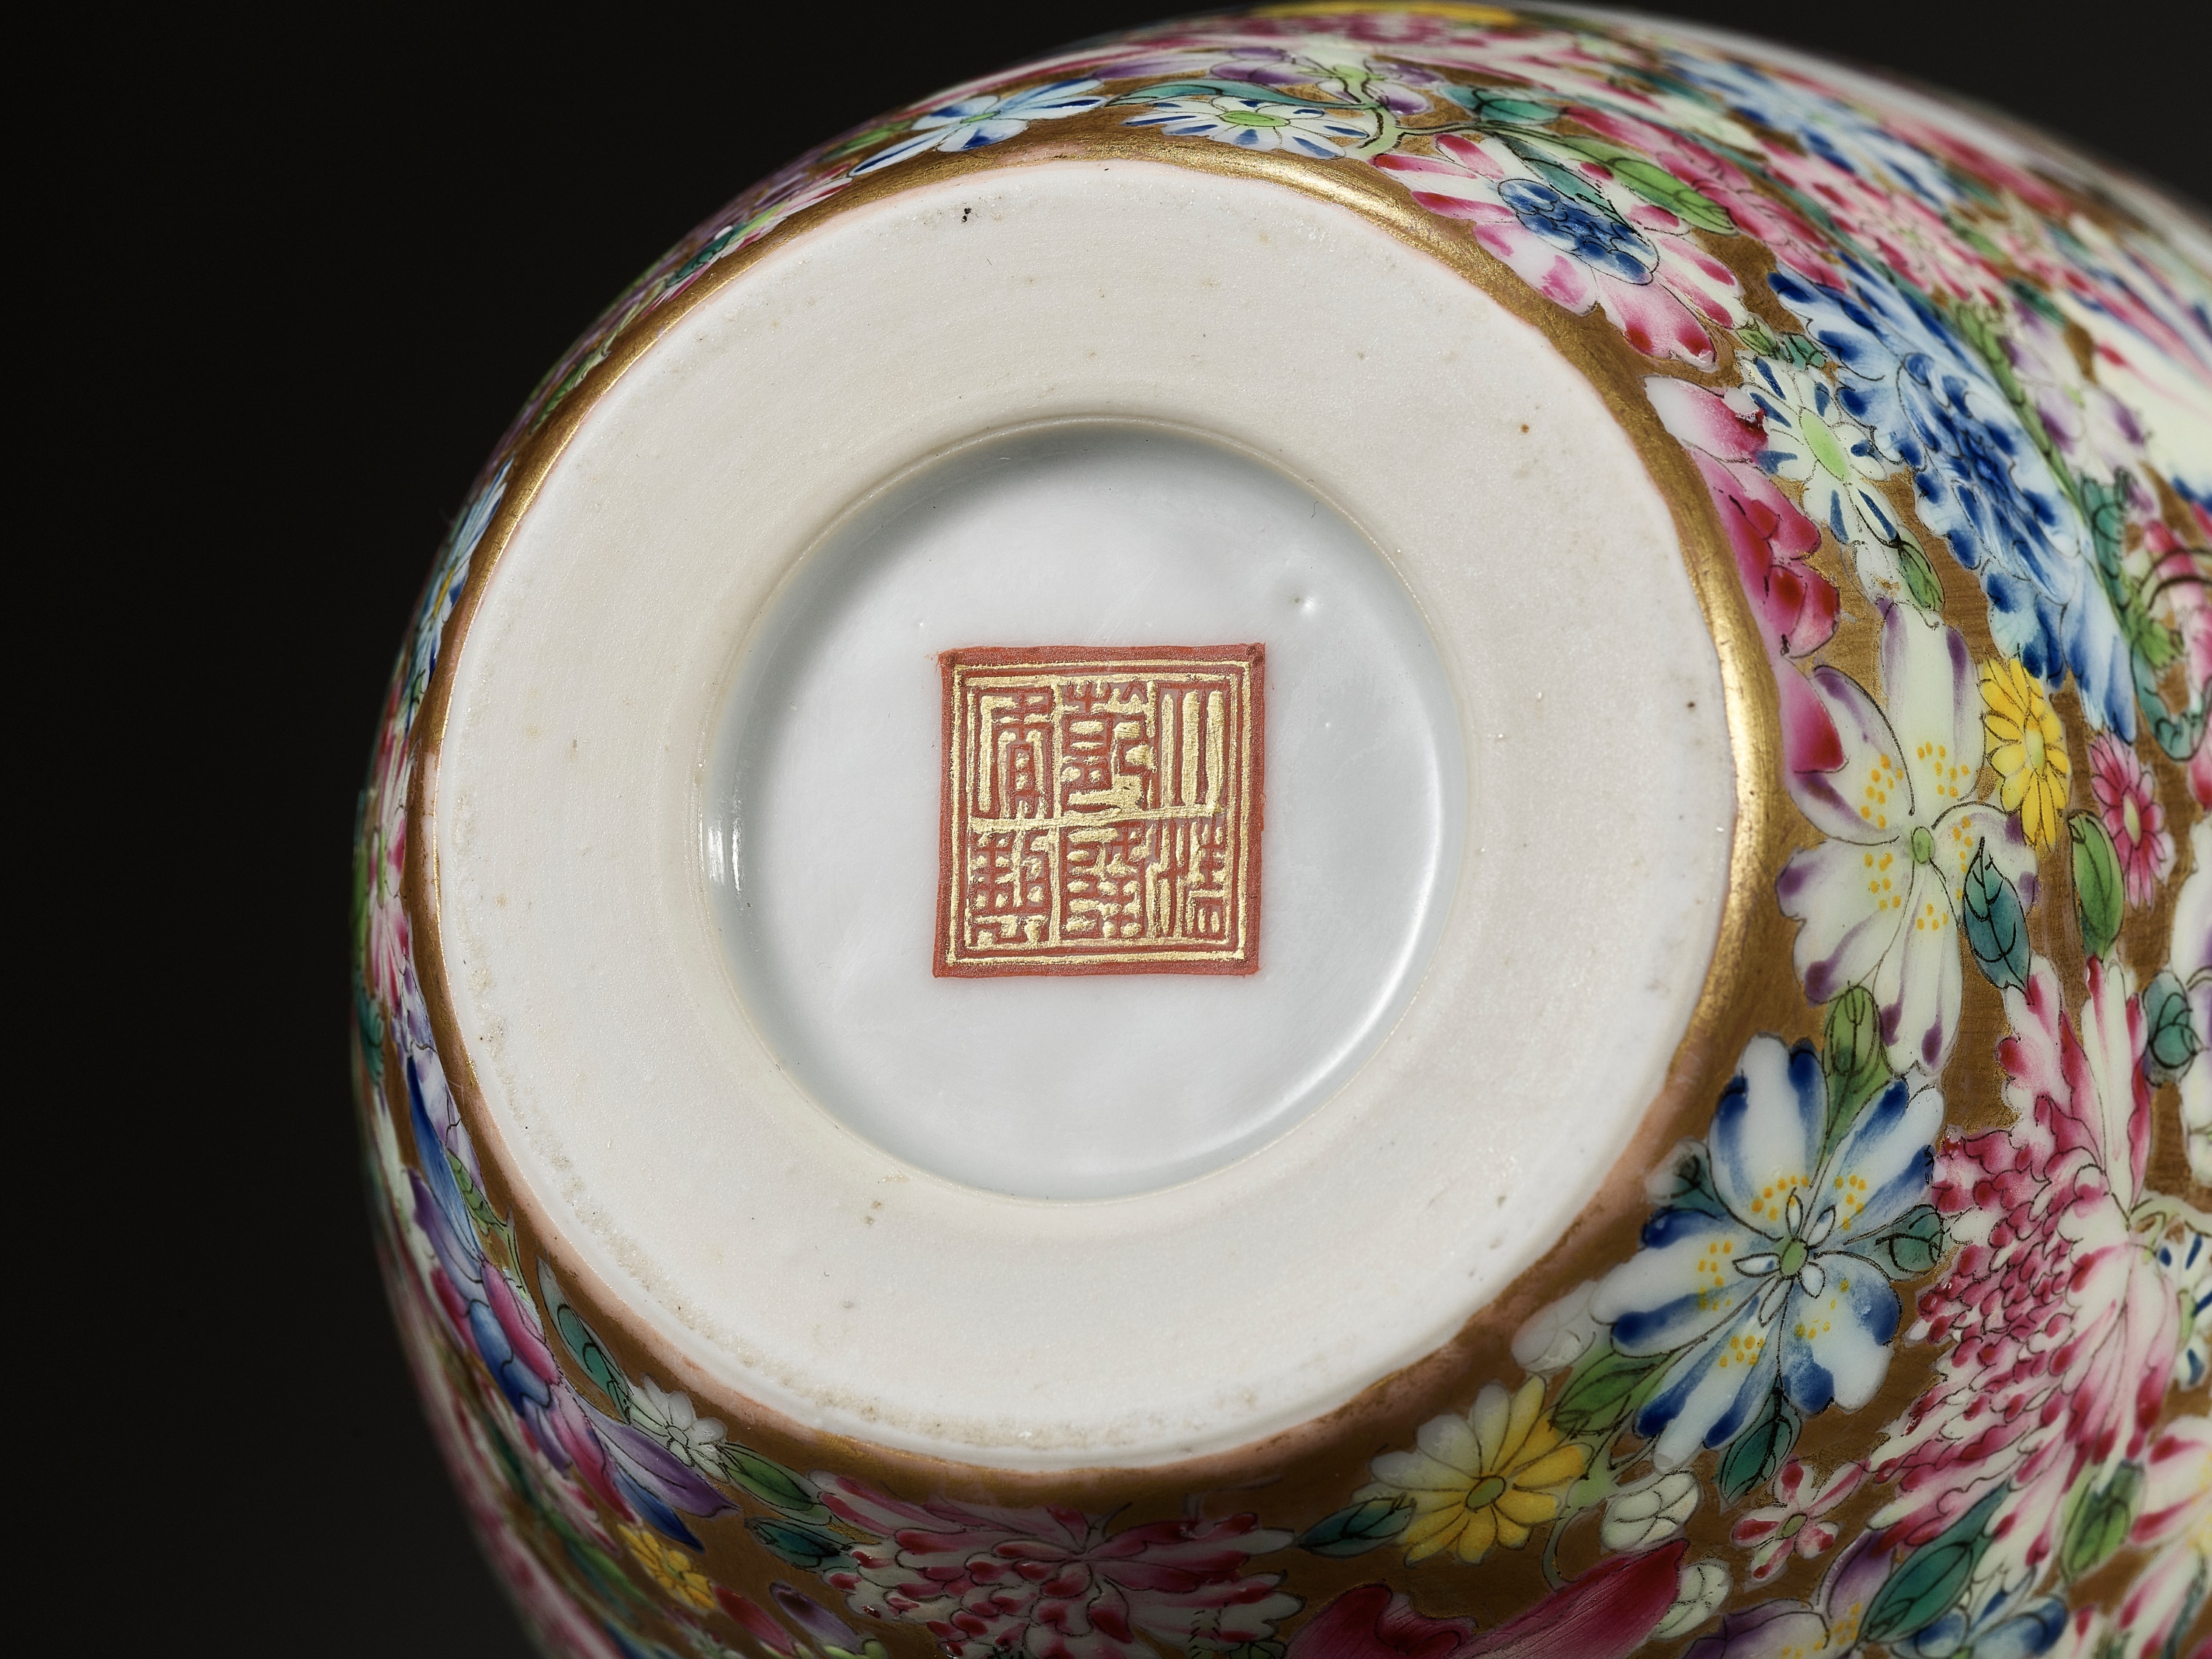 A PAIR OF FAMILLE ROSE 'MILLEFLEUR' VASES, LATE QING TO REPUBLIC - Image 11 of 13